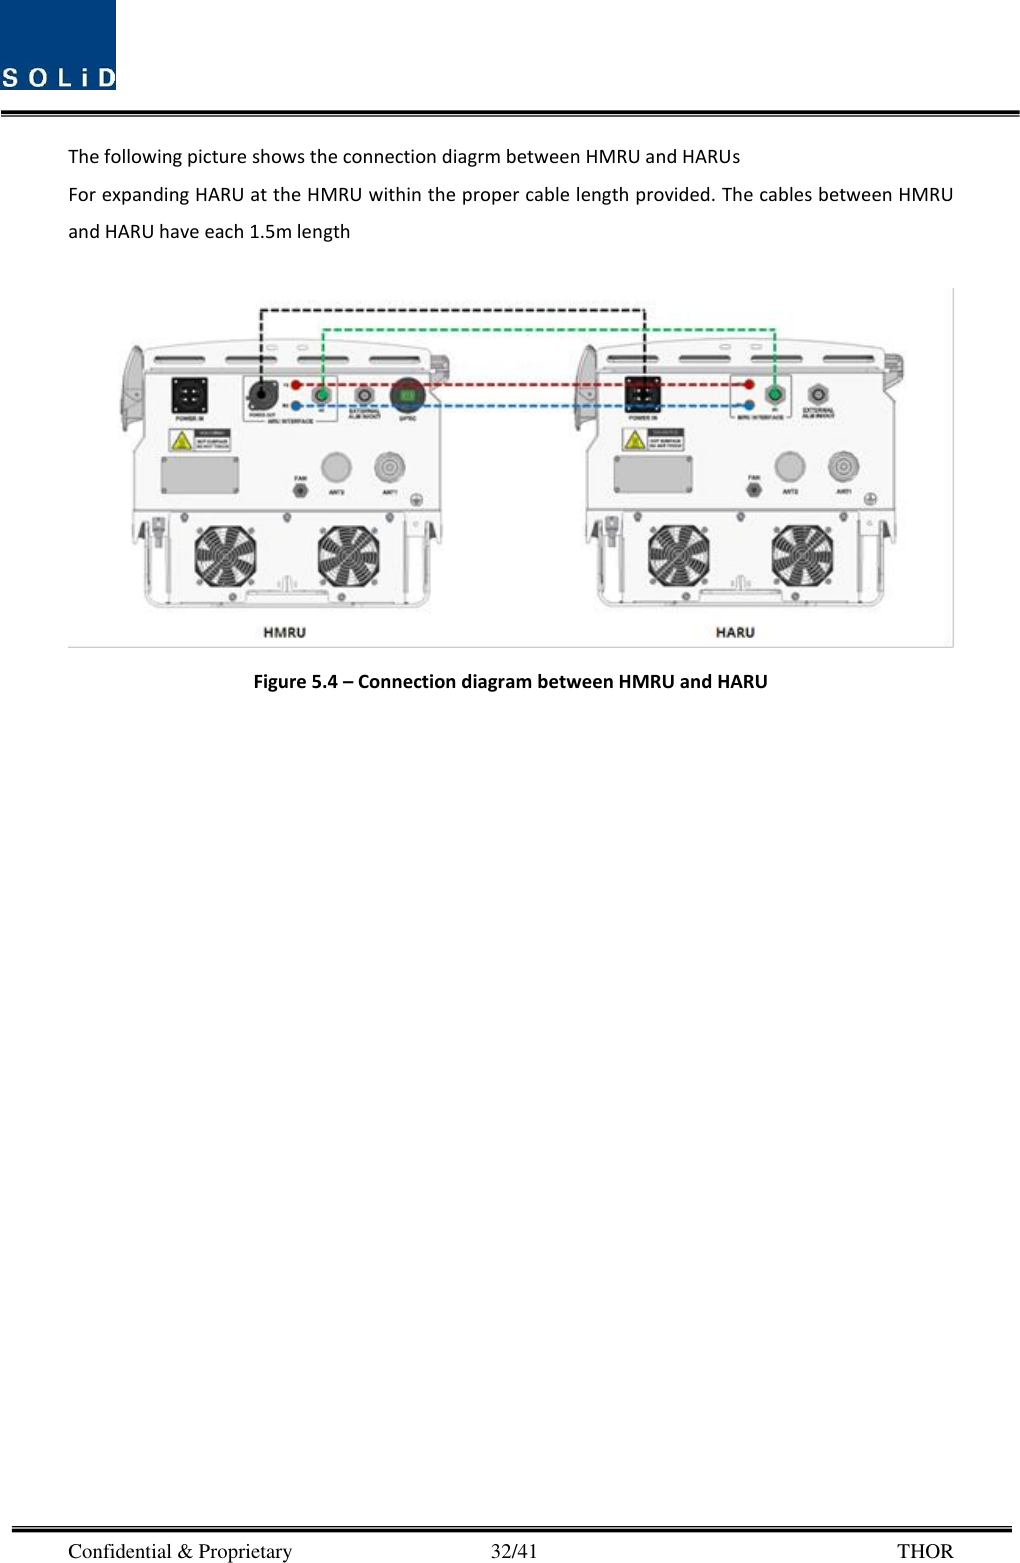  Confidential &amp; Proprietary                                      32/41       THOR The following picture shows the connection diagrm between HMRU and HARUs   For expanding HARU at the HMRU within the proper cable length provided. The cables between HMRU and HARU have each 1.5m length     Figure 5.4 – Connection diagram between HMRU and HARU   